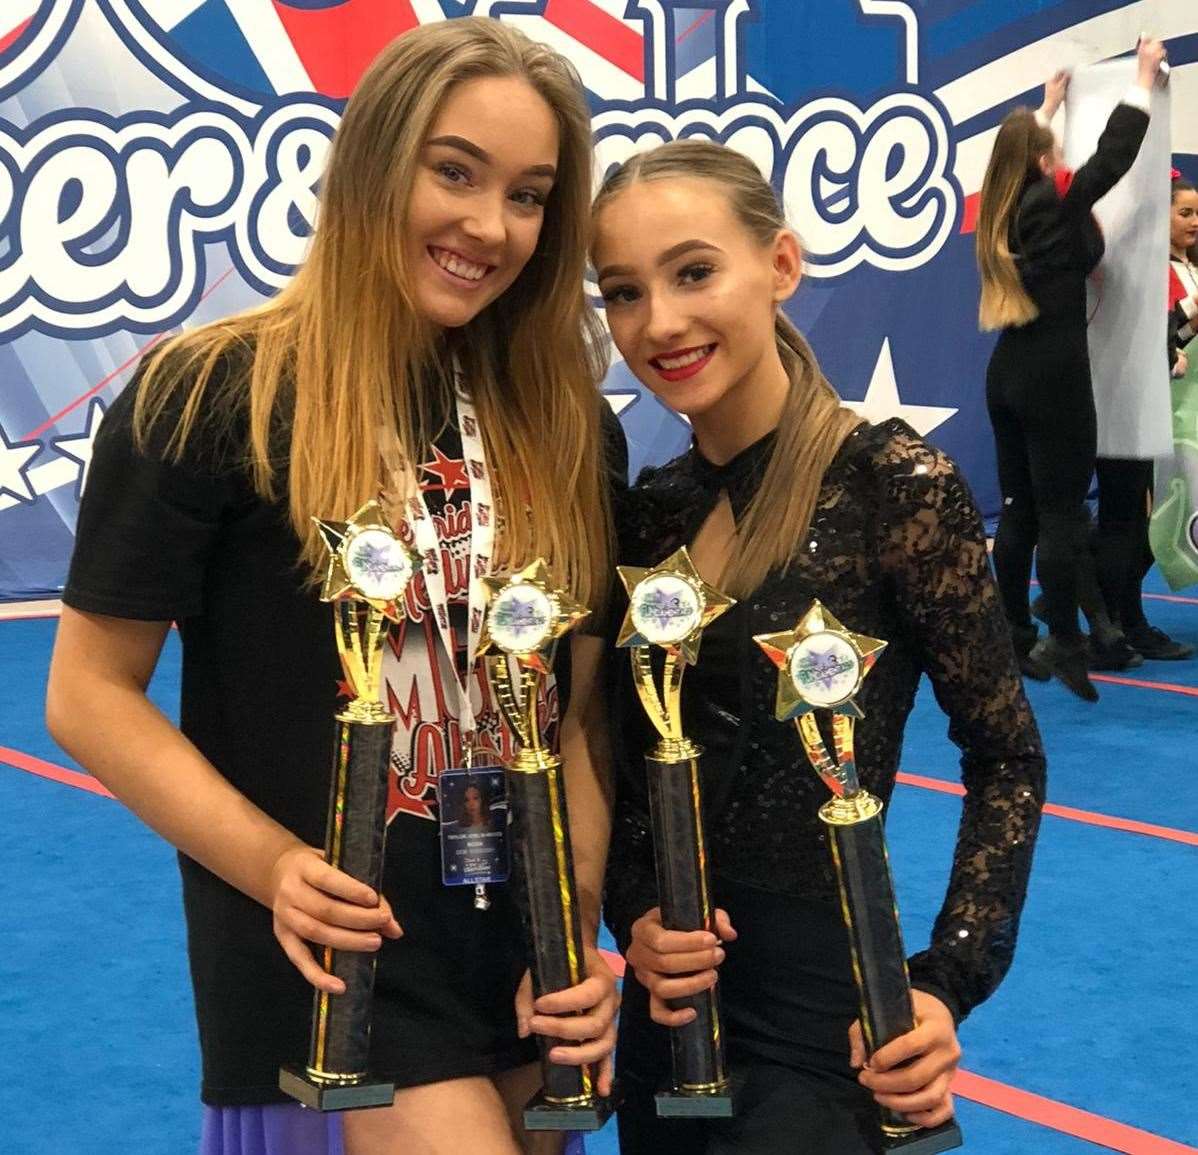 Taylor and Madison Joslin-Wood with their trophies after a cheerleading competition. Picture: Jennifer Joslin-Wood